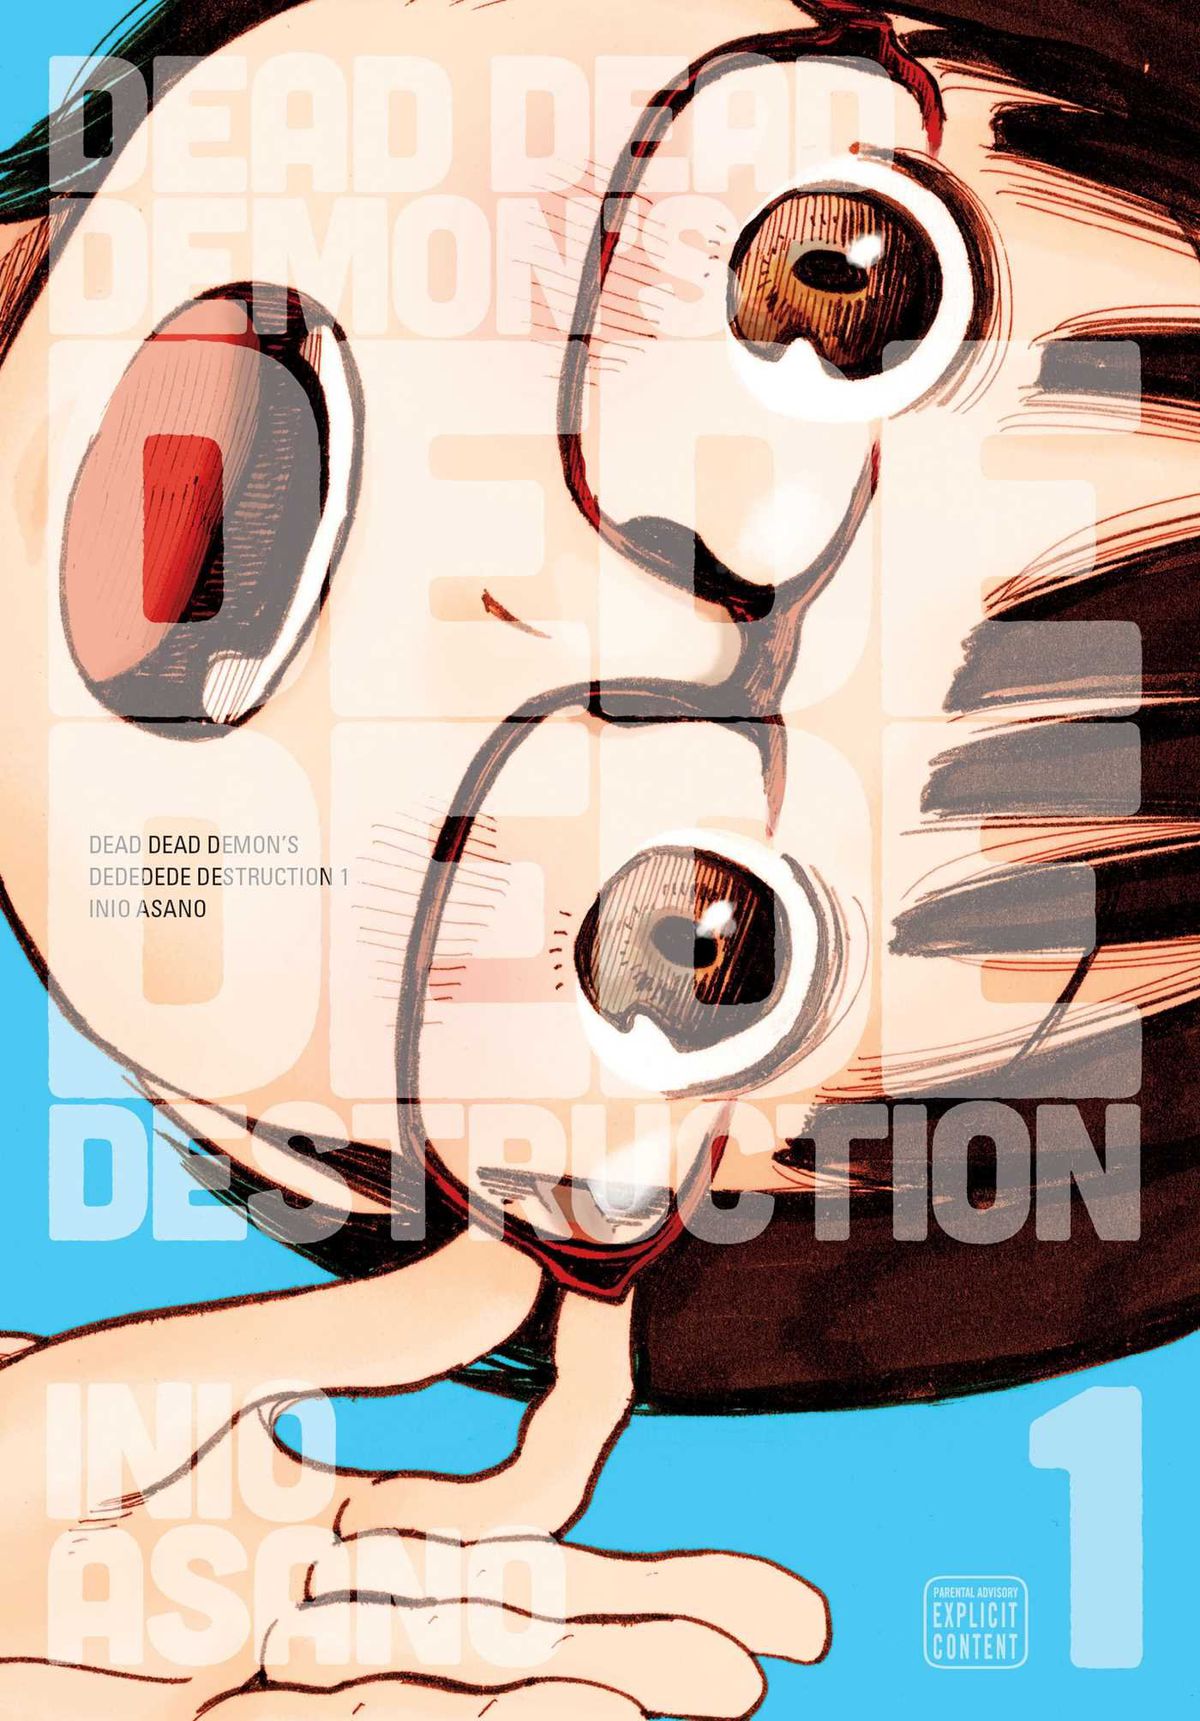 A child adjusts their glasses with mouth open, image rotated 90 degrees, on the cover of Dead Dead Demons Dedede Destruction Vol 1. 